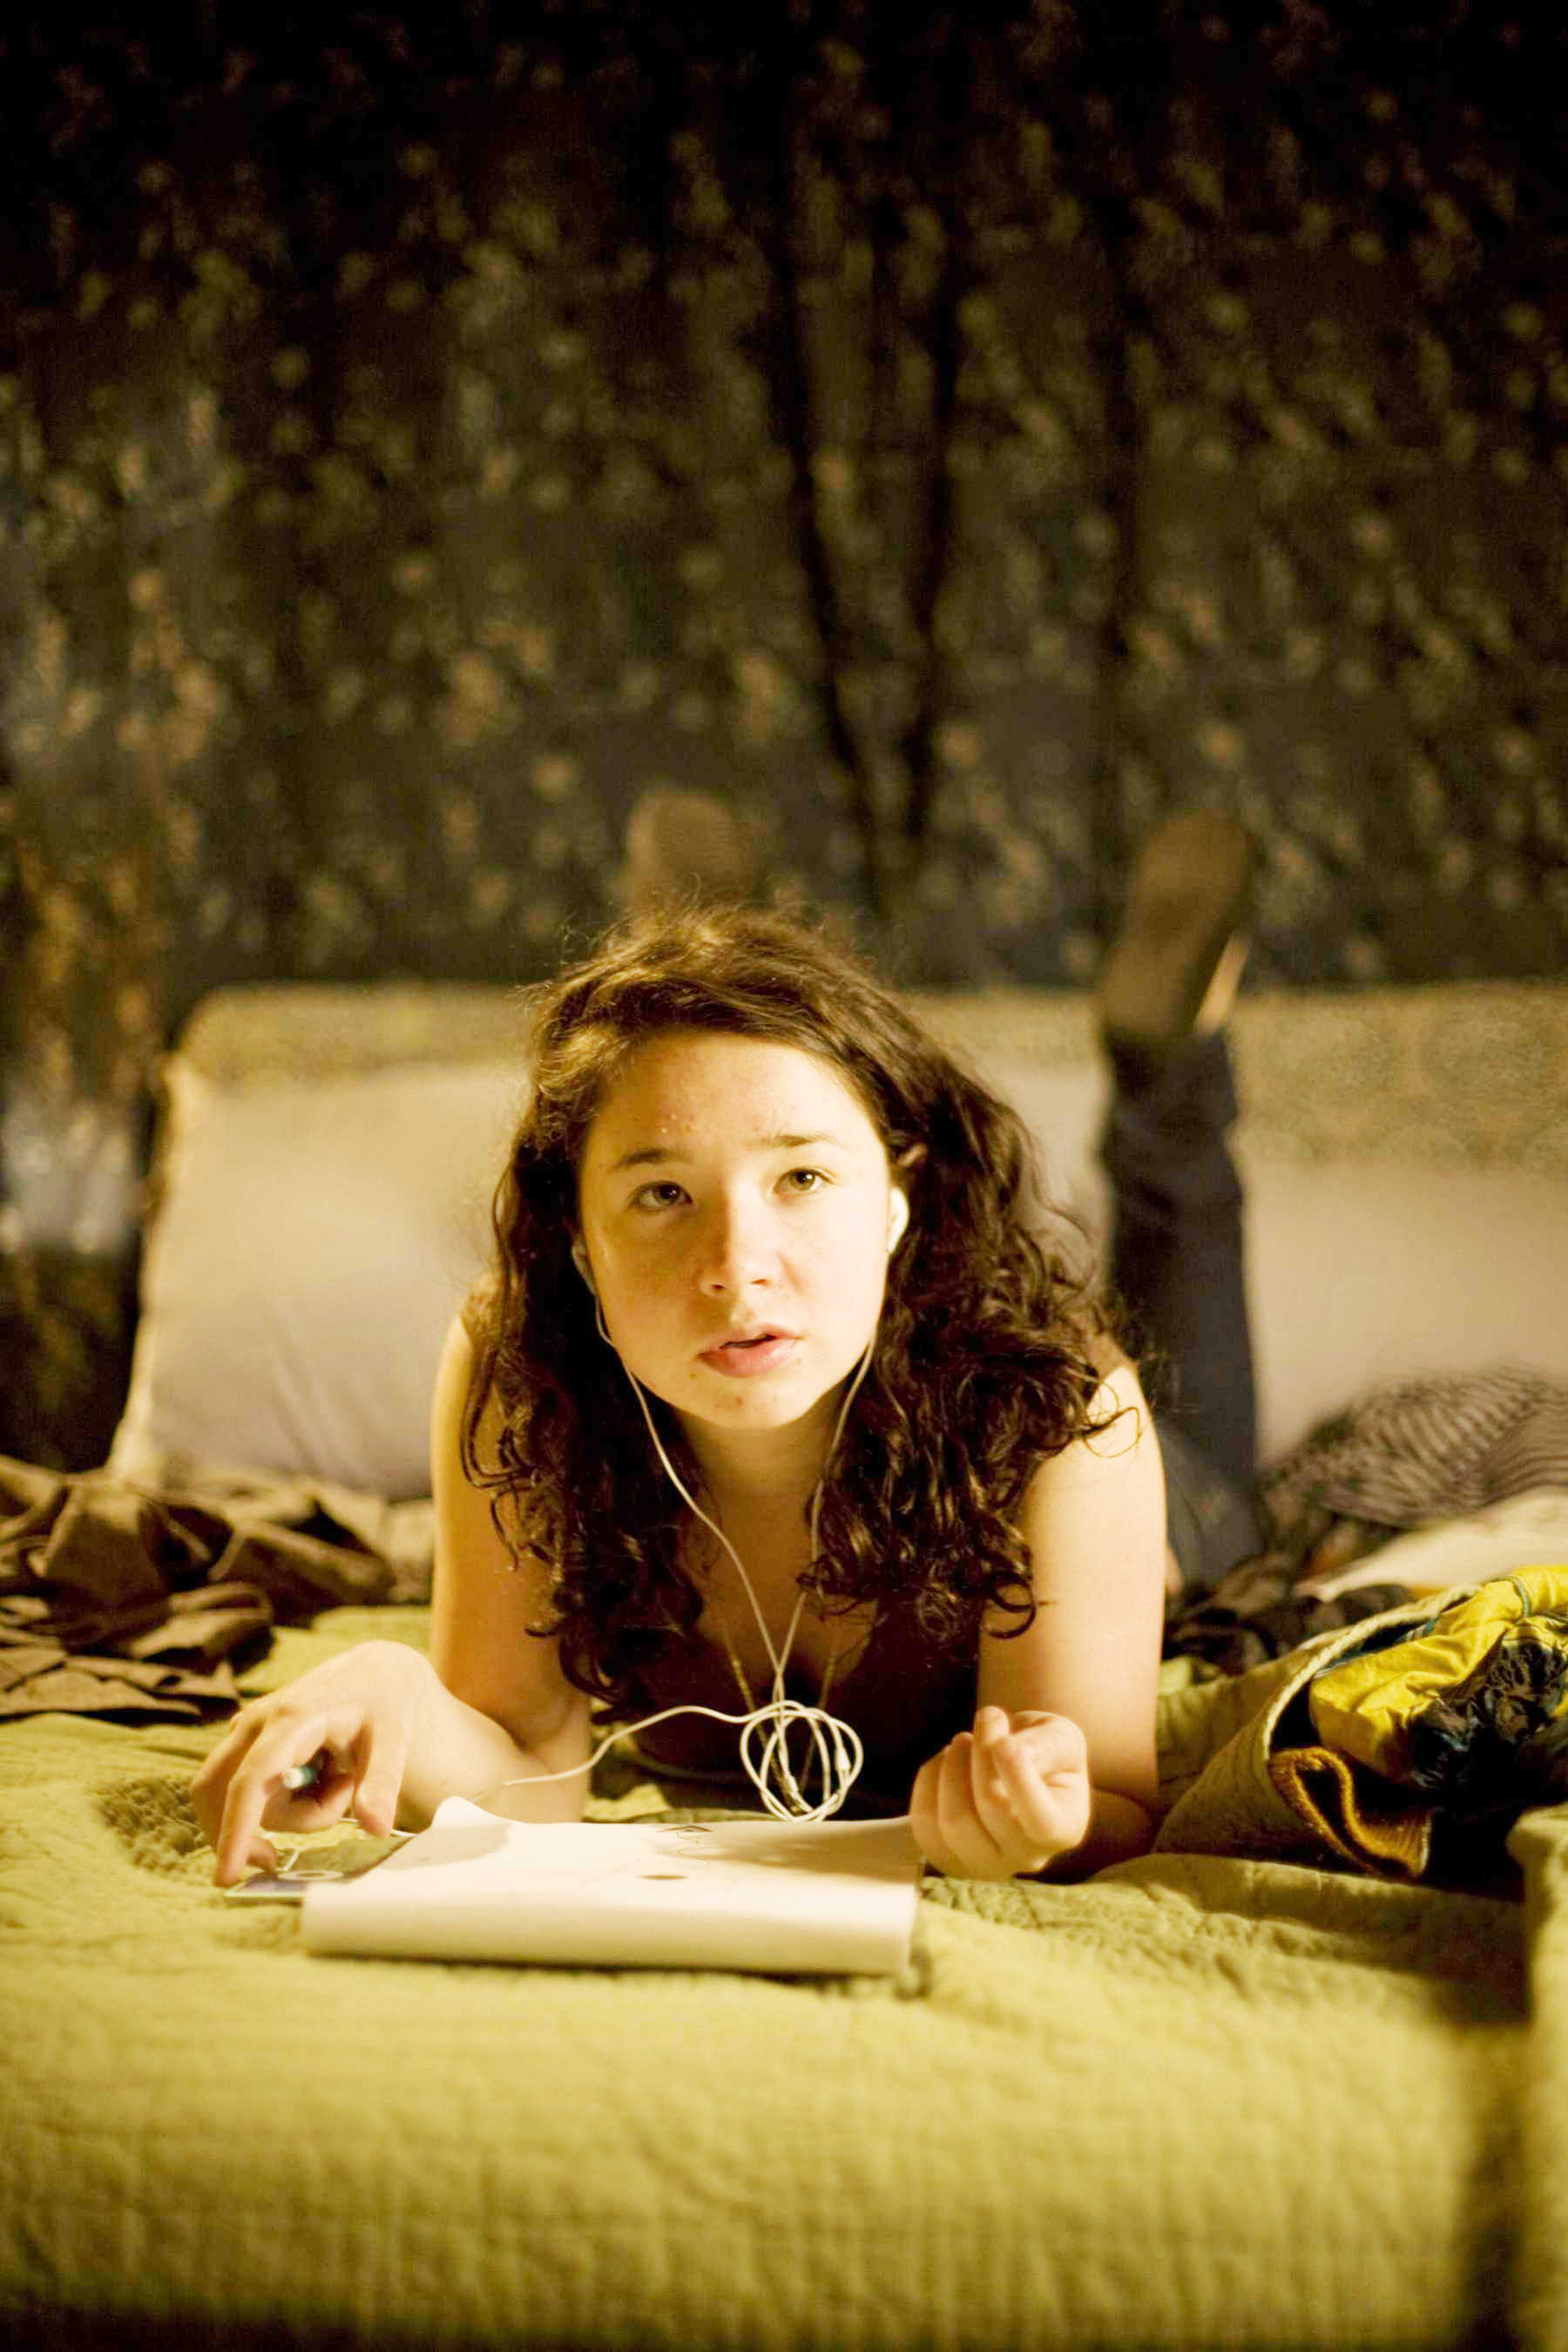 Sarah Steele stars as Abby in Sony Pictures Classics' Please Give (2010). Photo credit by Piotr Redlinksi.